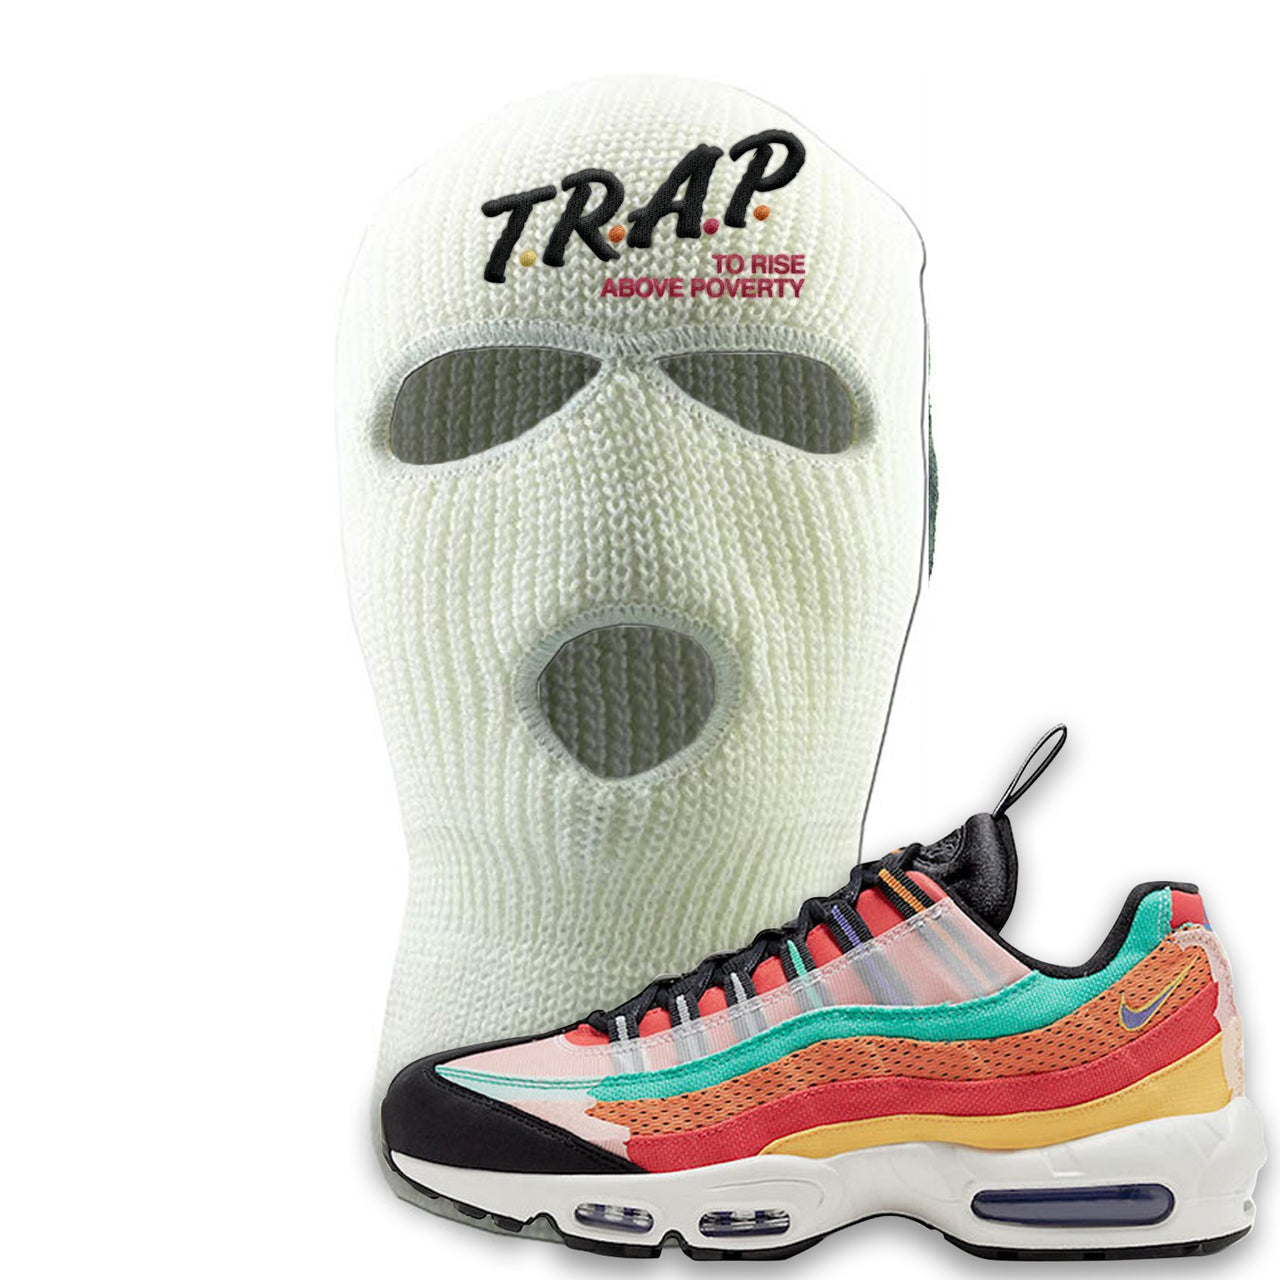 Air Max 95 Black History Month Sneaker White Ski Mask | Winter Mask to match Nike Air Max 95 Black History Month Shoes | Trap To Rise Above Poverty